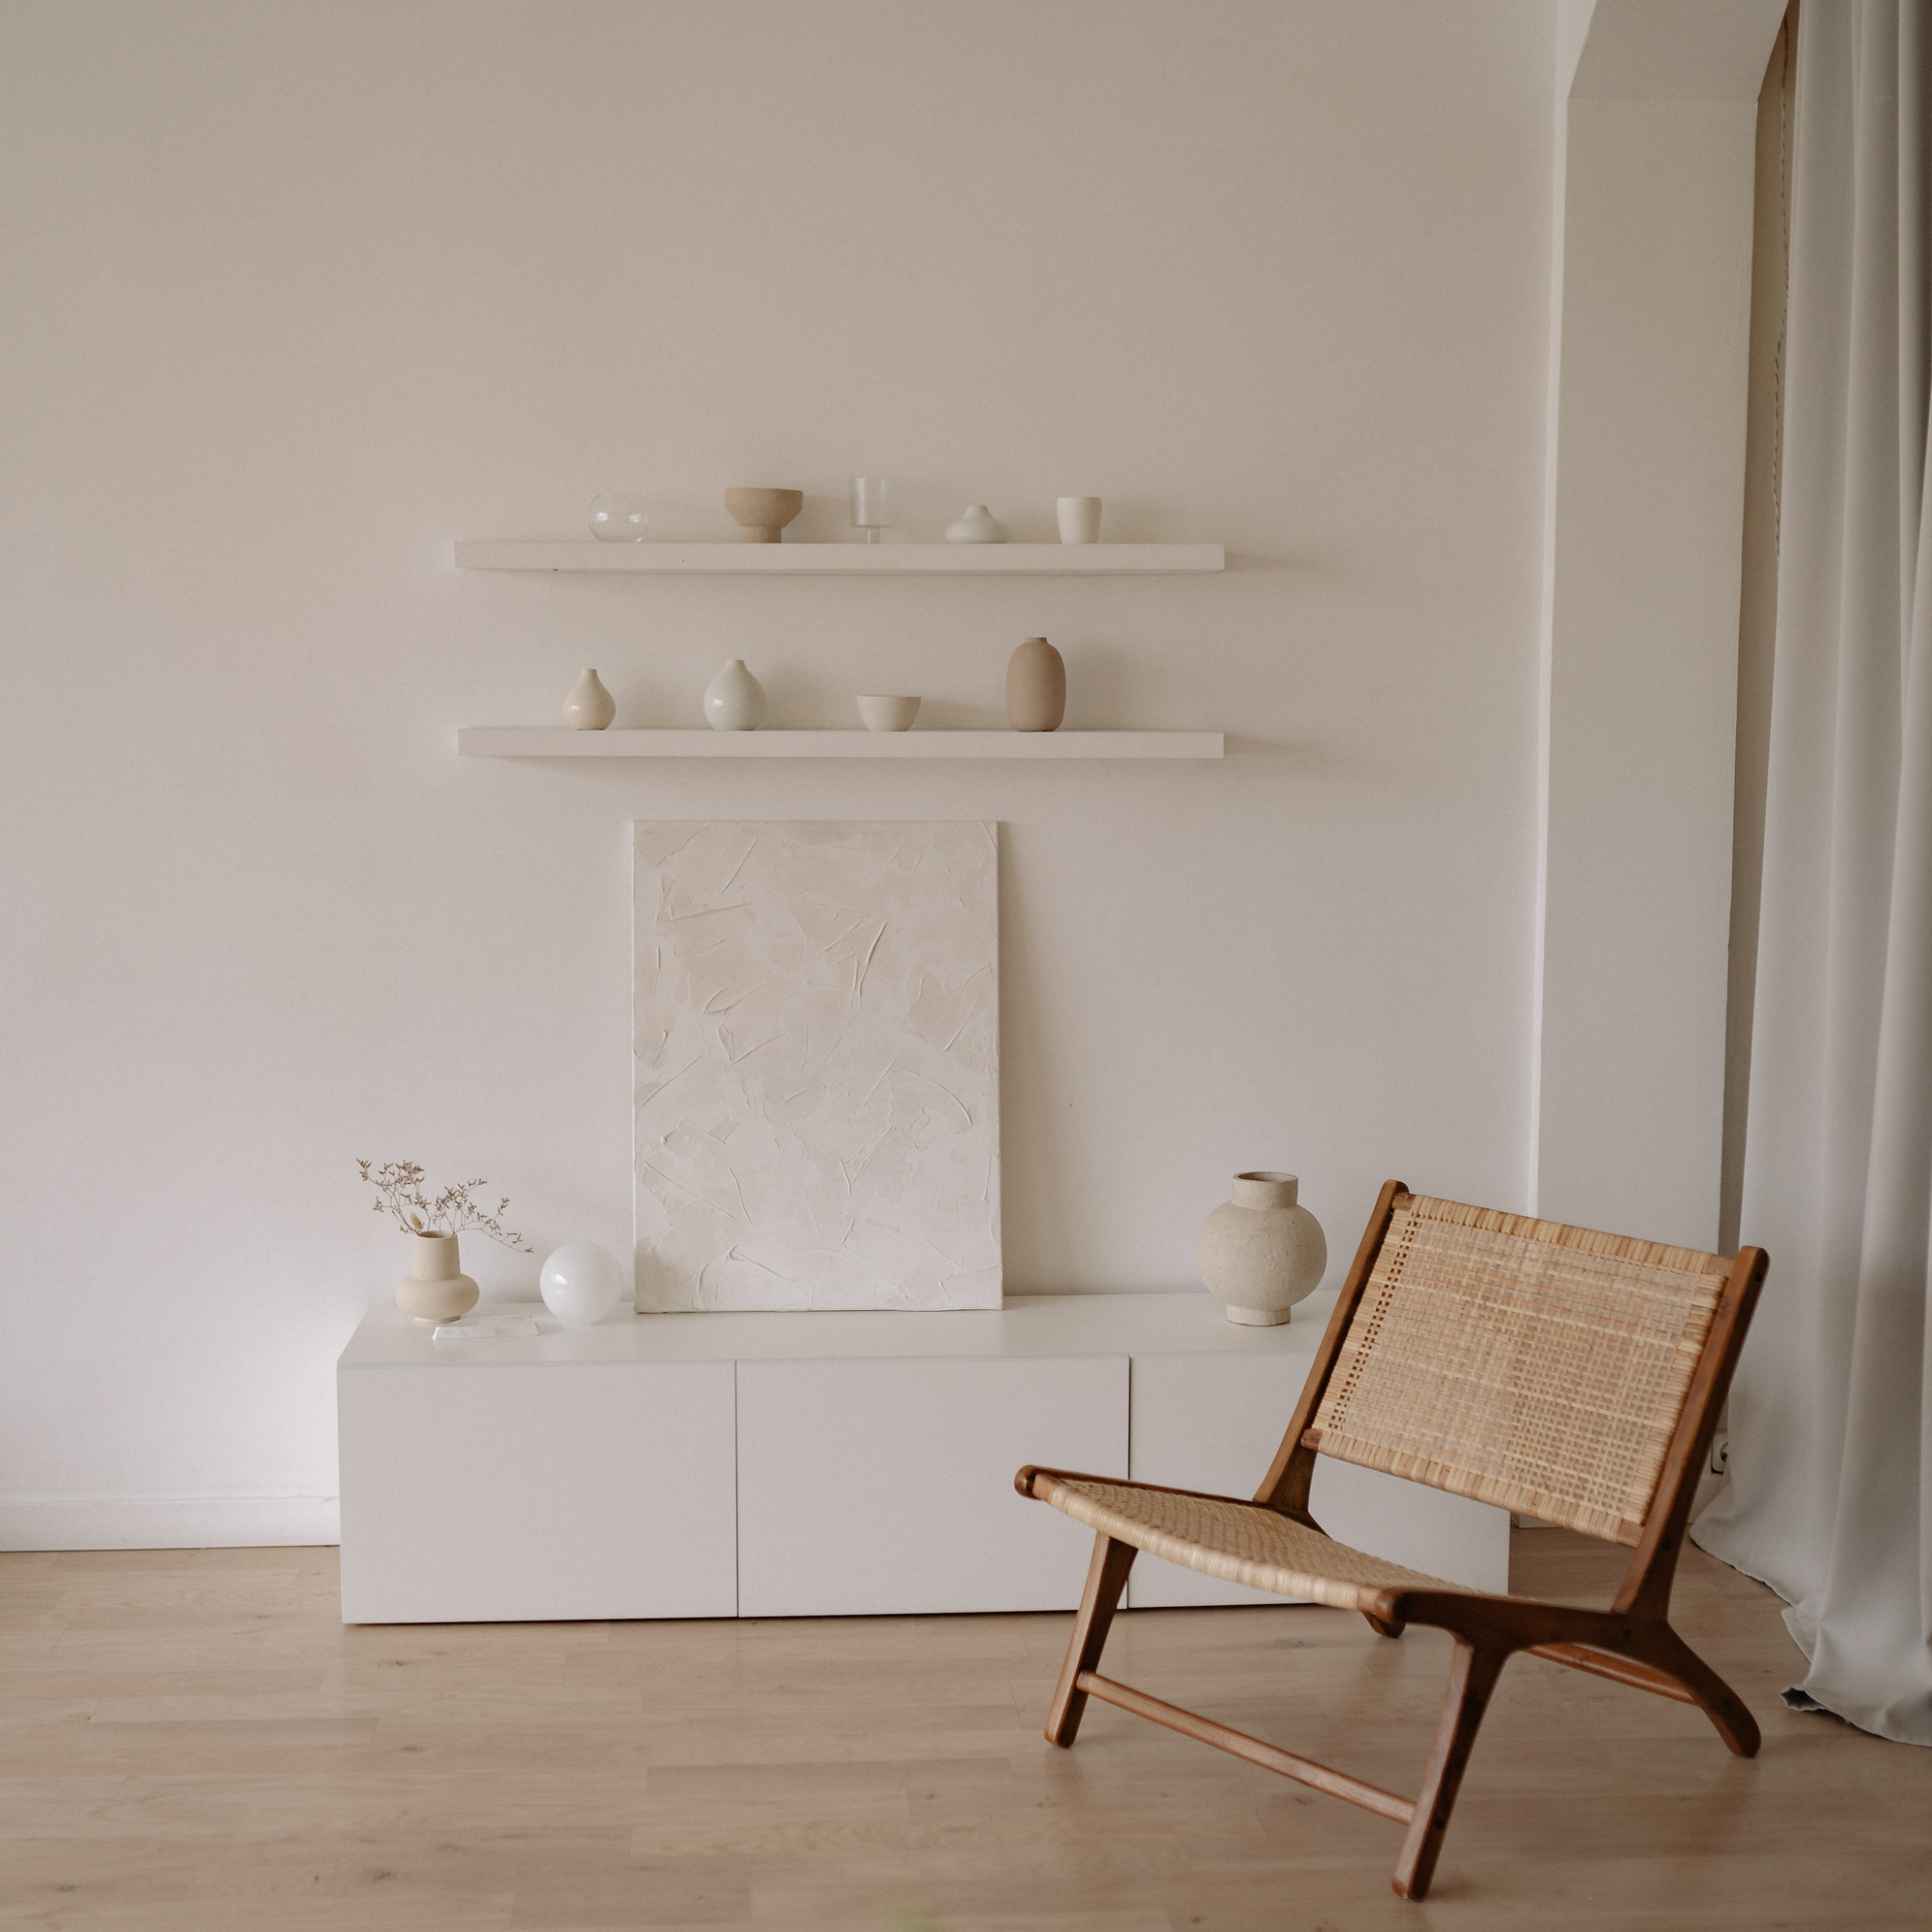 Brown Wooden Chair Beside White Wall